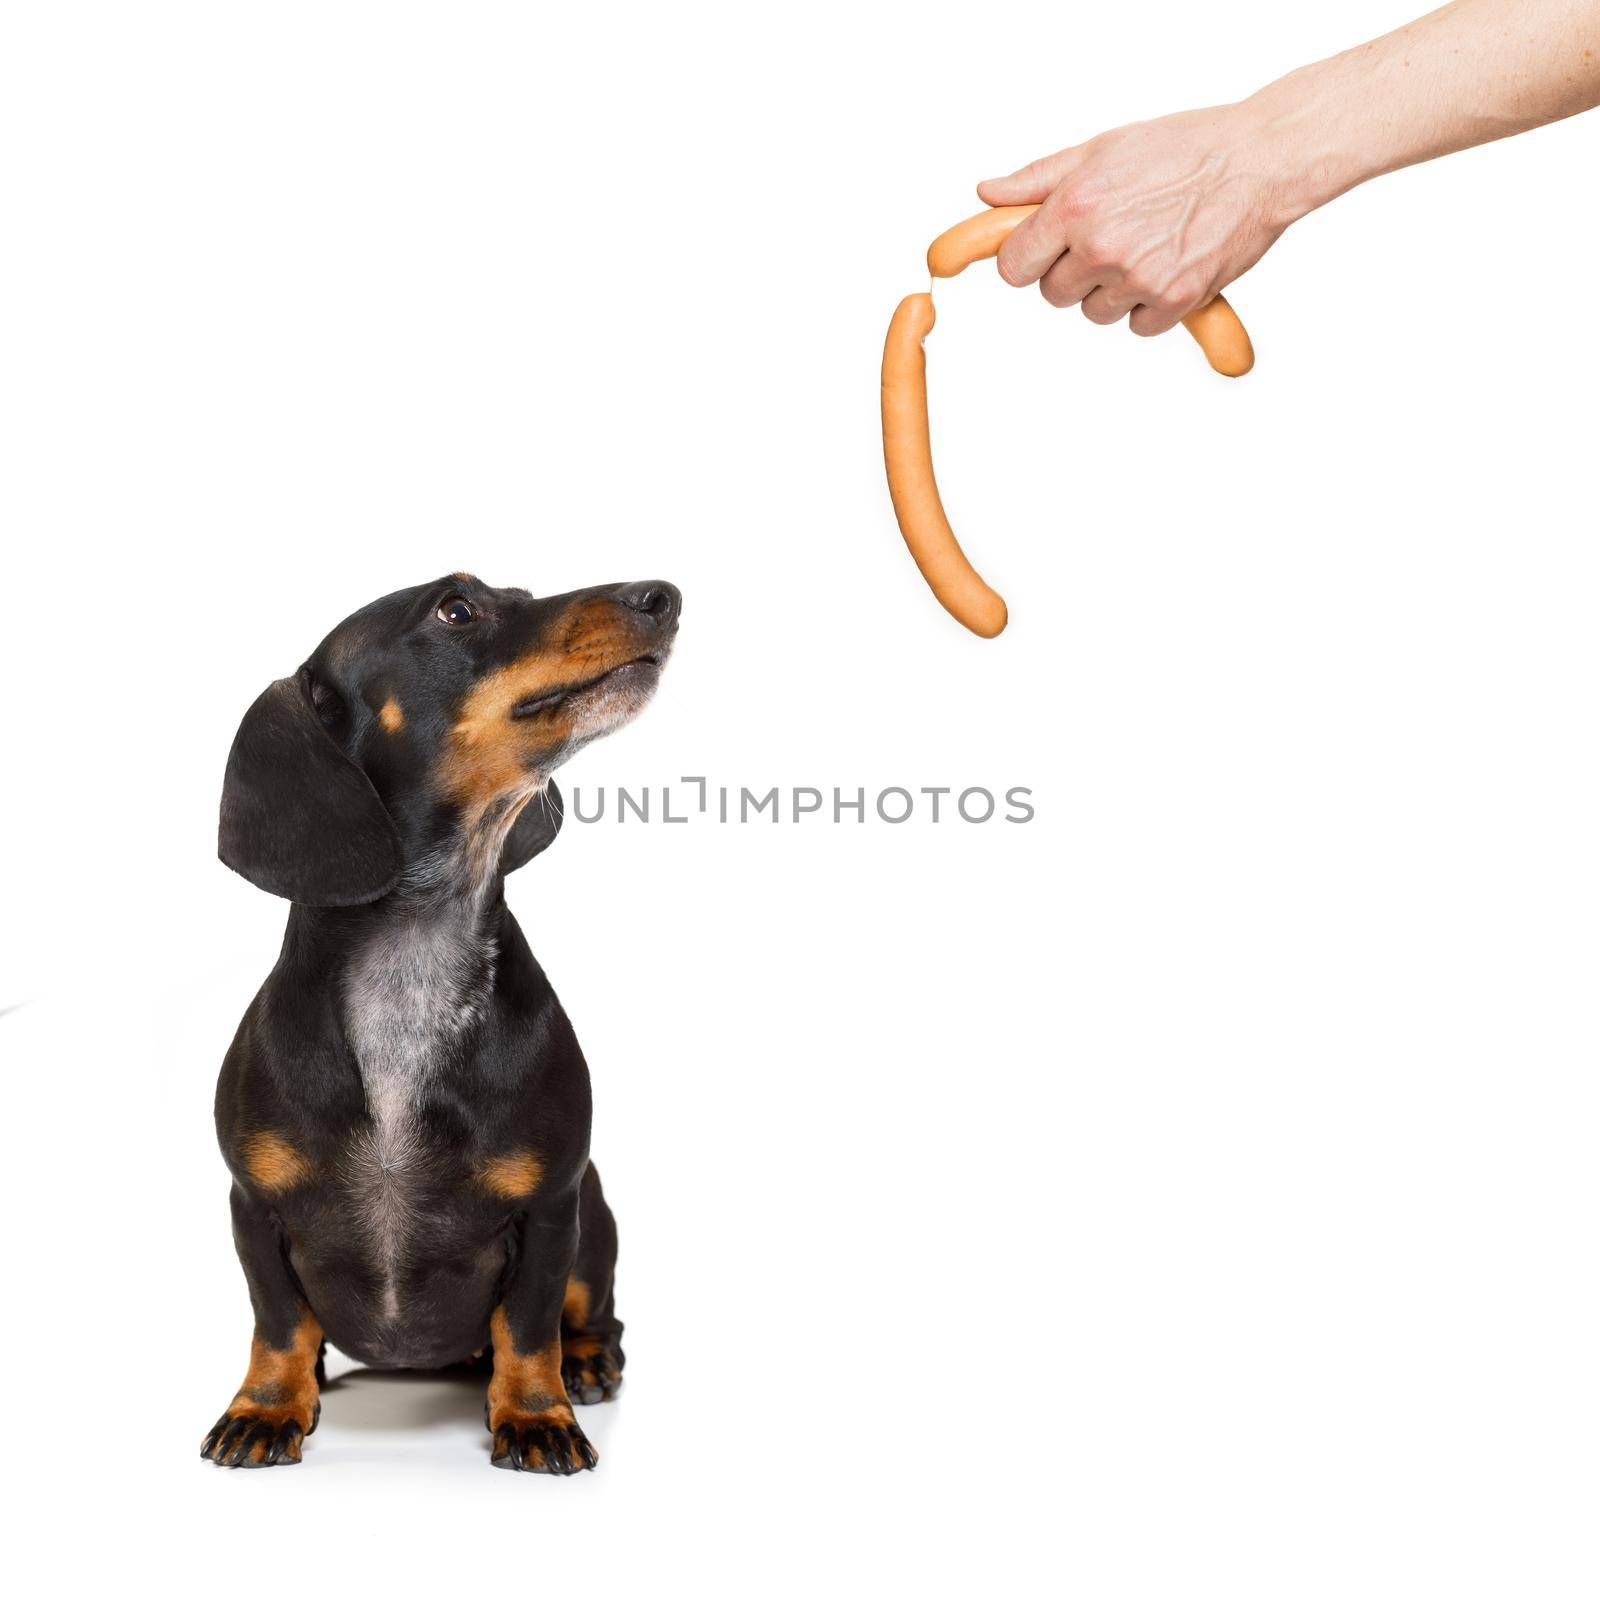 hungry dachshund sausage dog , for a treat wiener  by his owner , isolated on white background for a meal or food